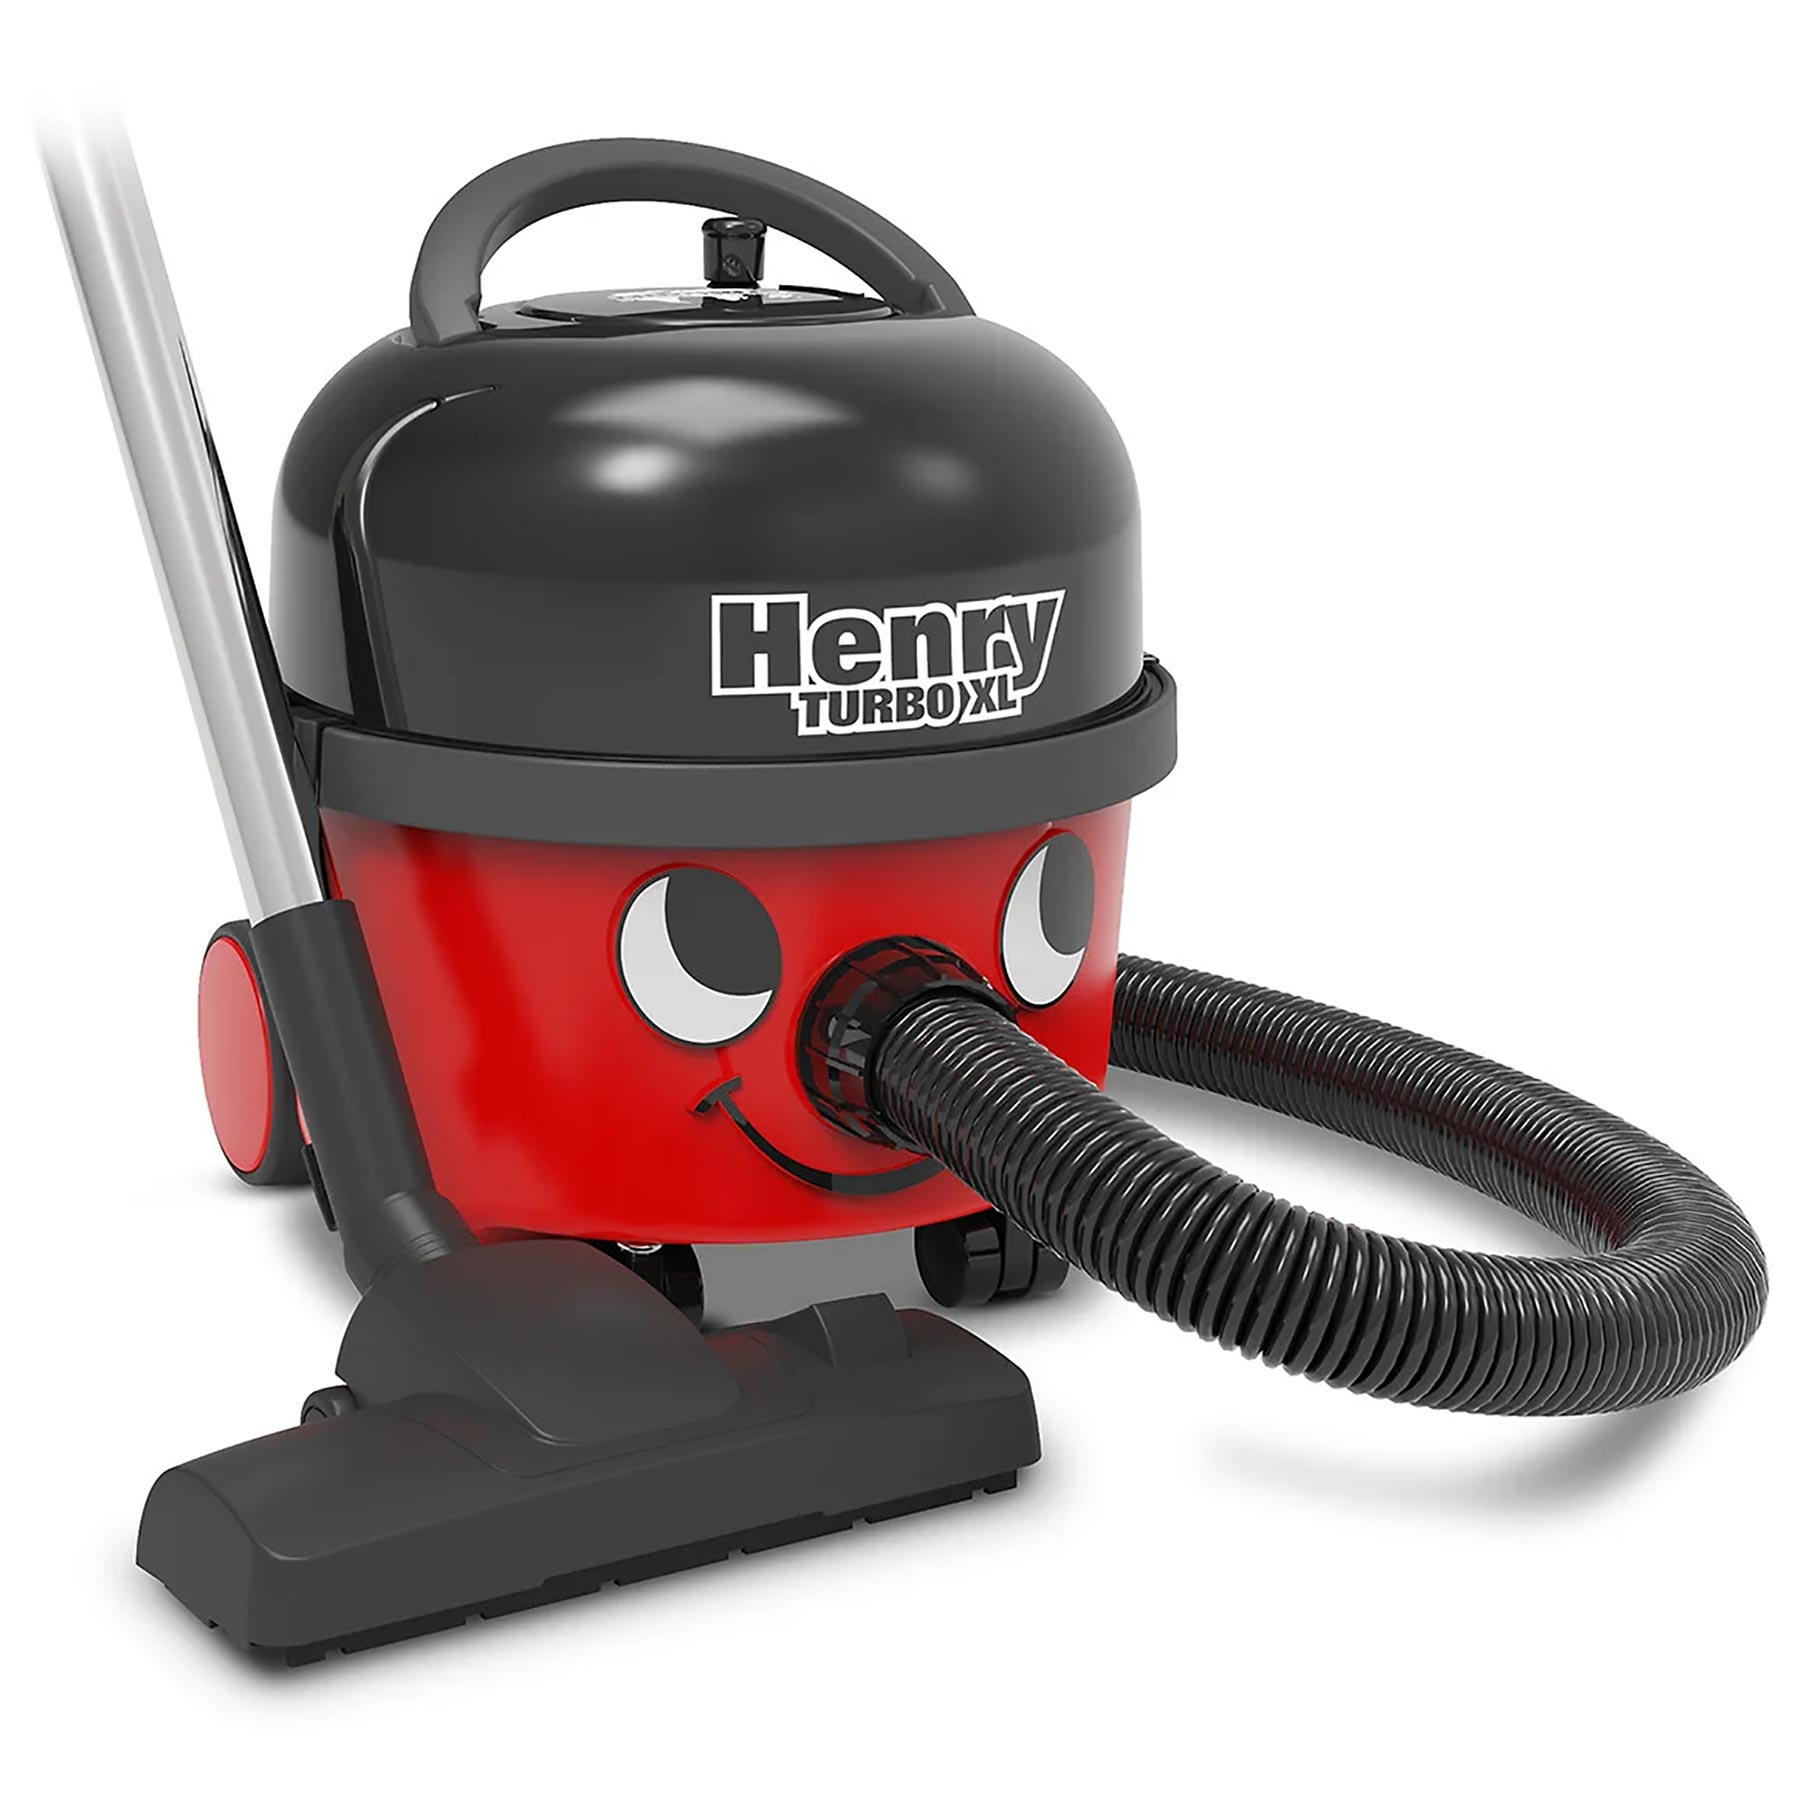 Numatic HVT200 HENRY Turbo XL Cylinder Vacuum Cleaner Red